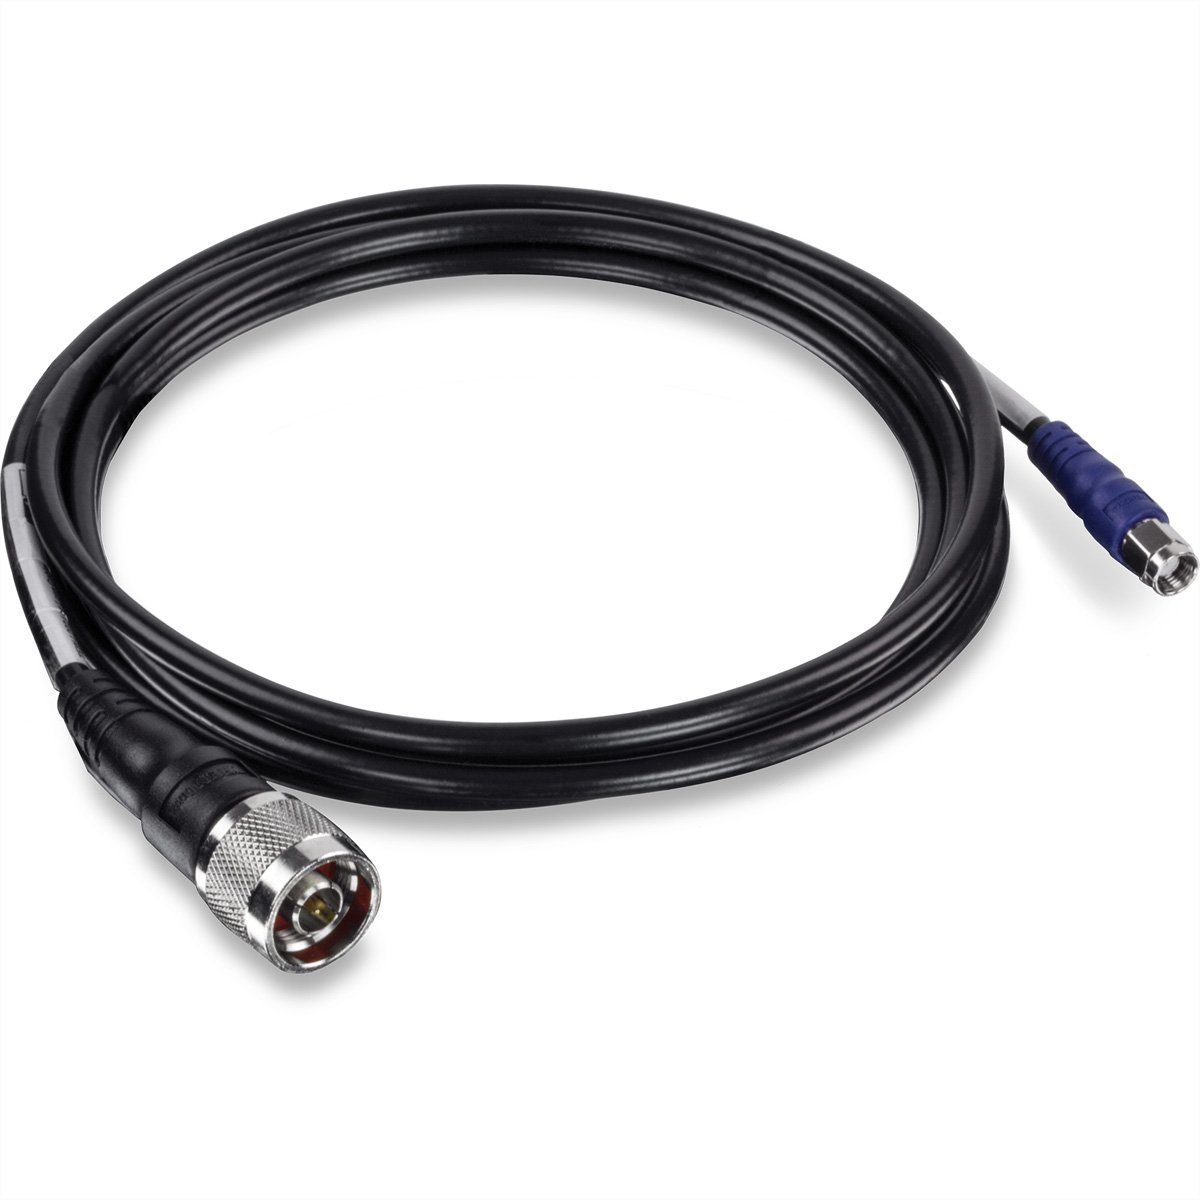 Trendnet LMR200 Reverse SMA N-Type Cable WLAN-Antenne 